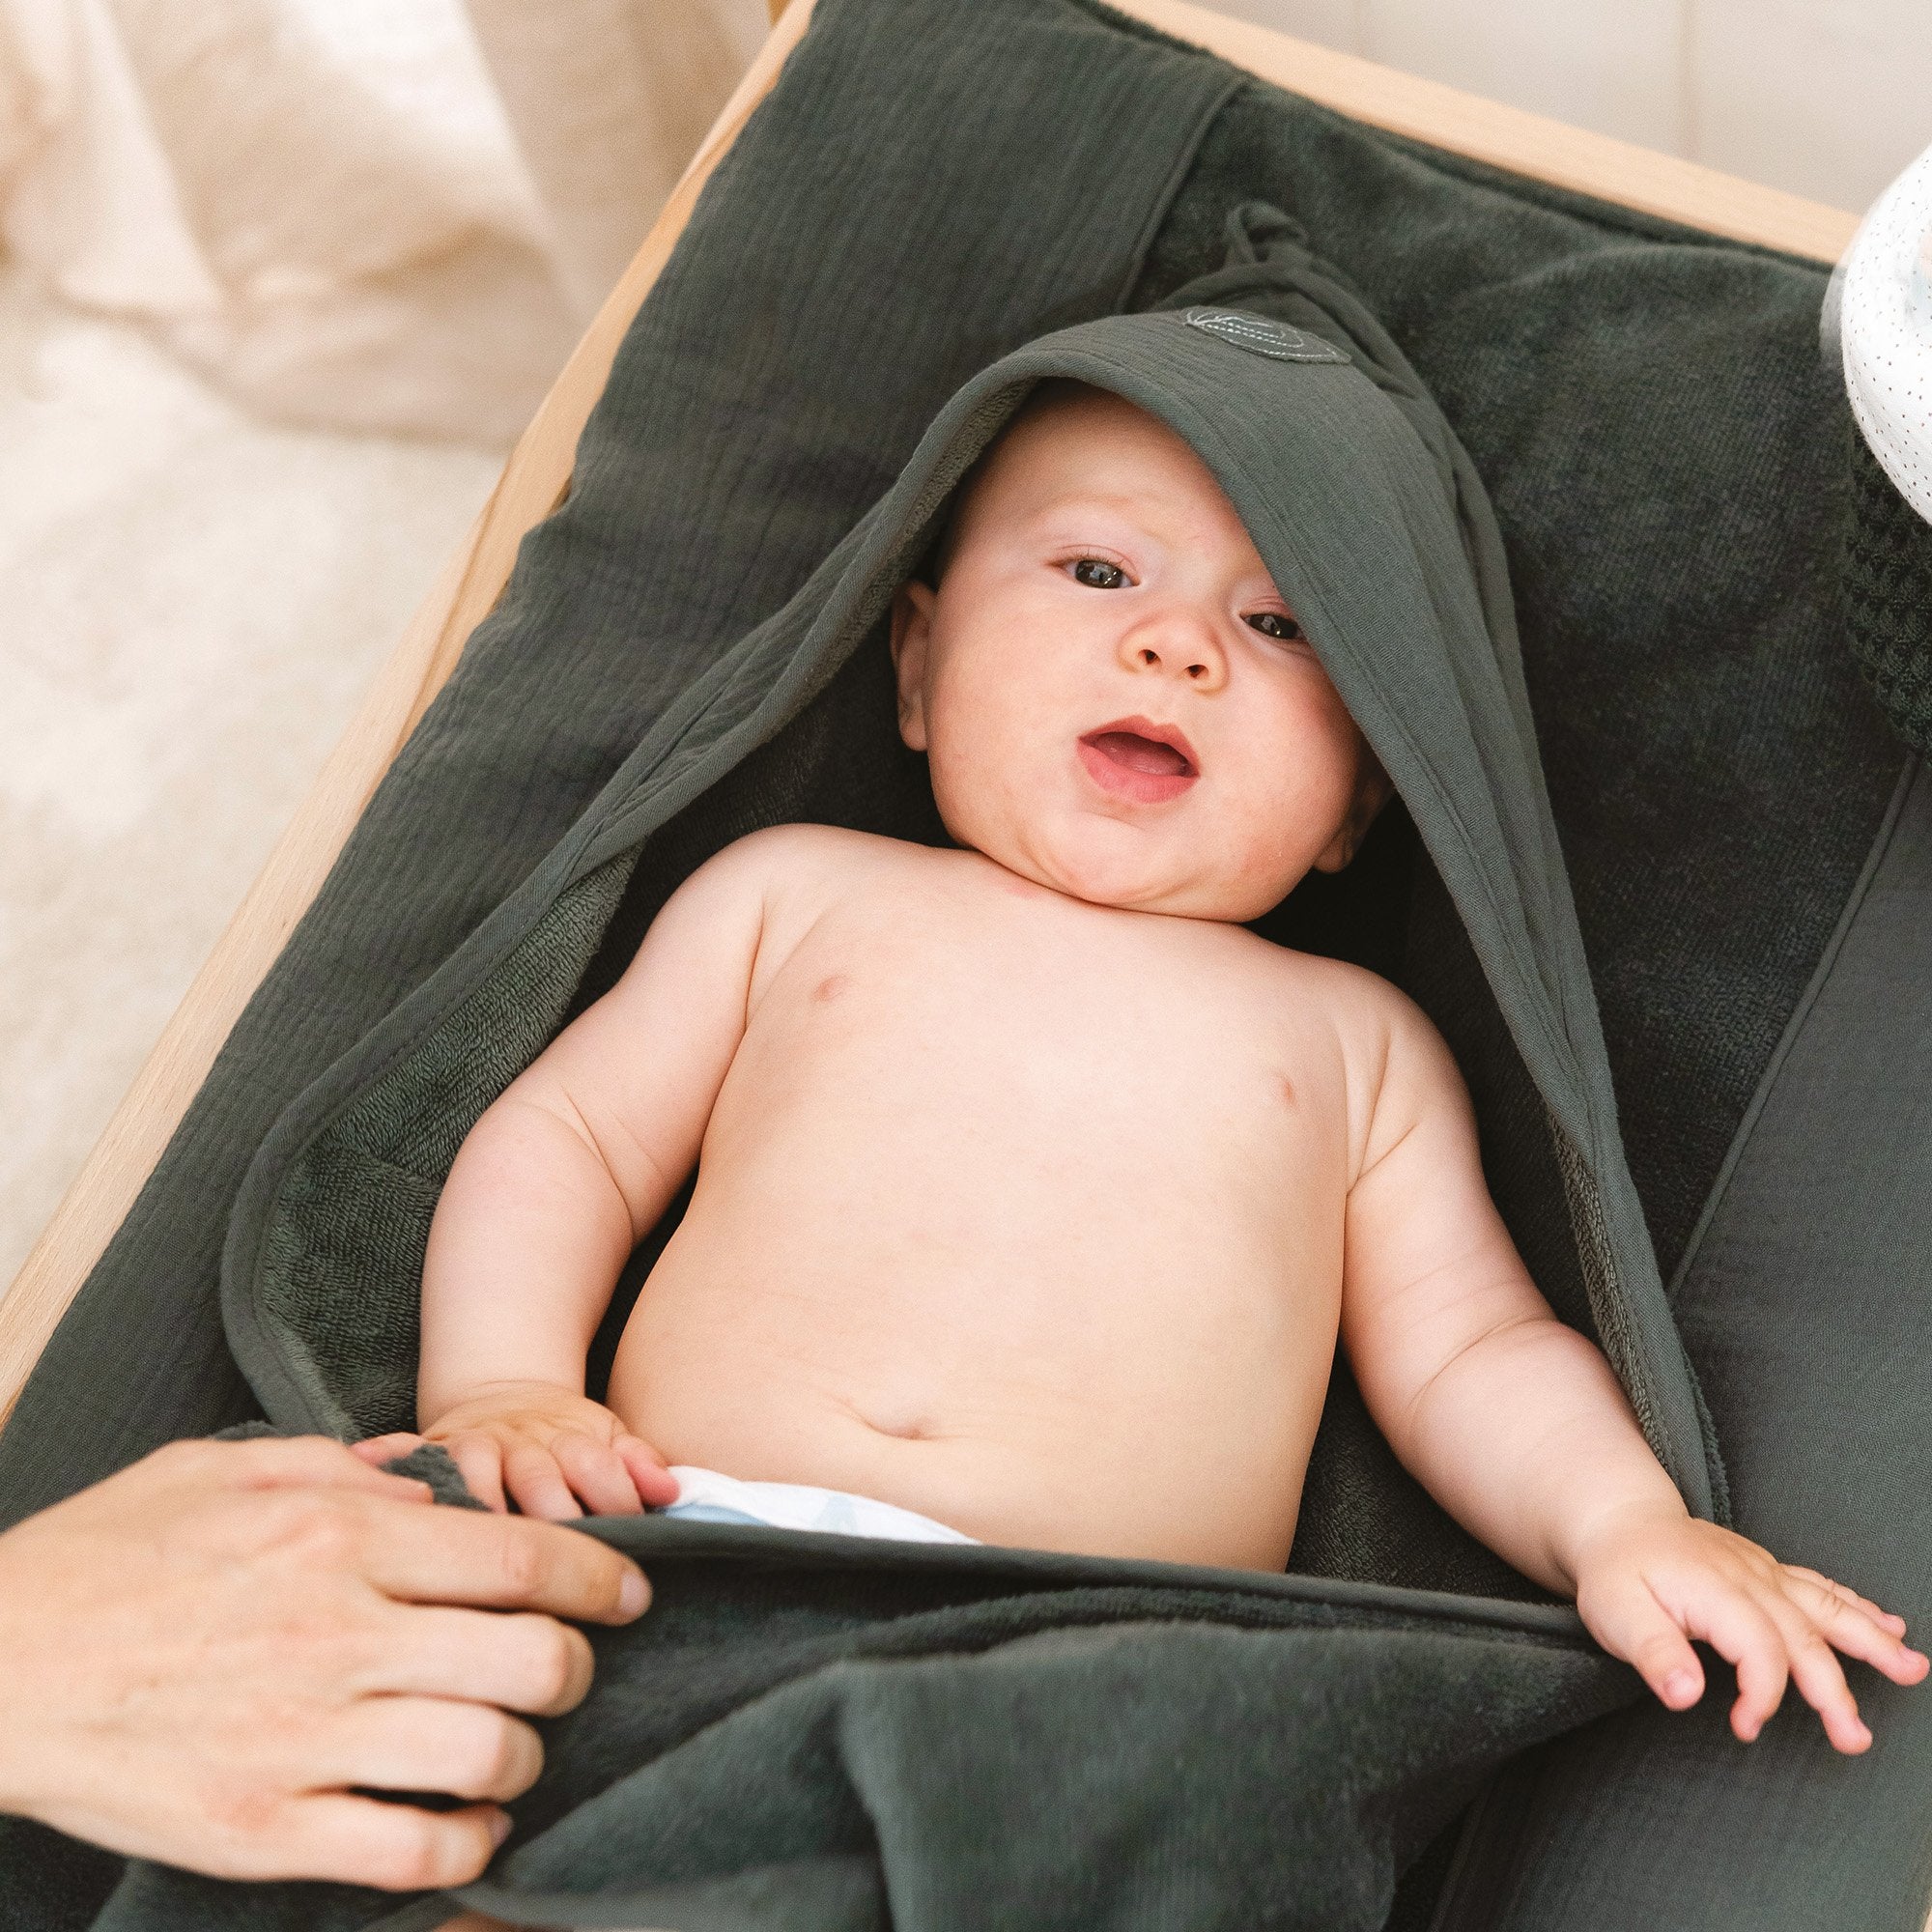 Buying baby changing pad: what to look out for? – Nattou